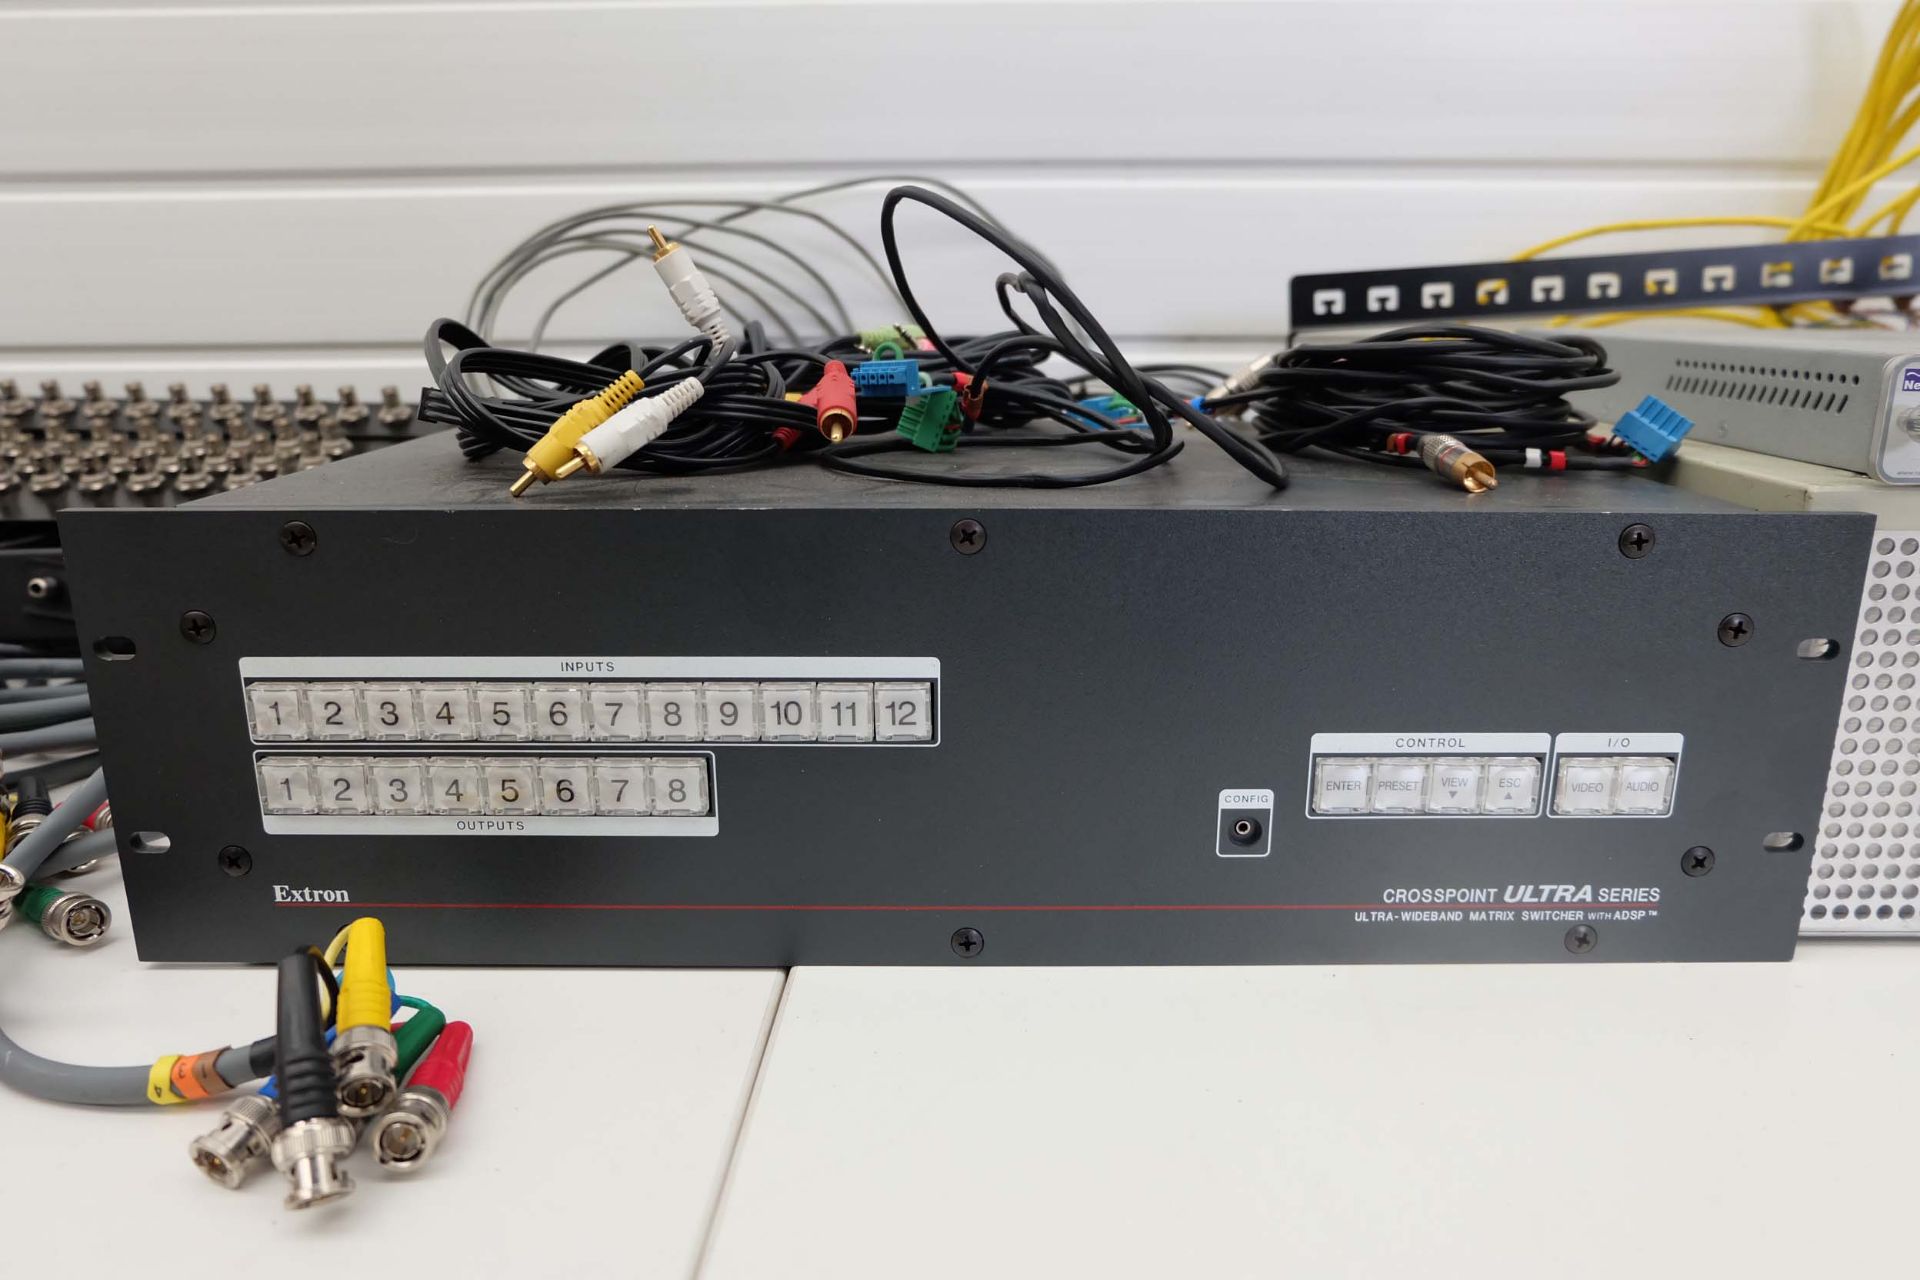 Extron Crosspoint Ultra Series Wideband Matrix Switcher With ADSP. Plus Marconi CE168 X and Accomany - Image 2 of 8